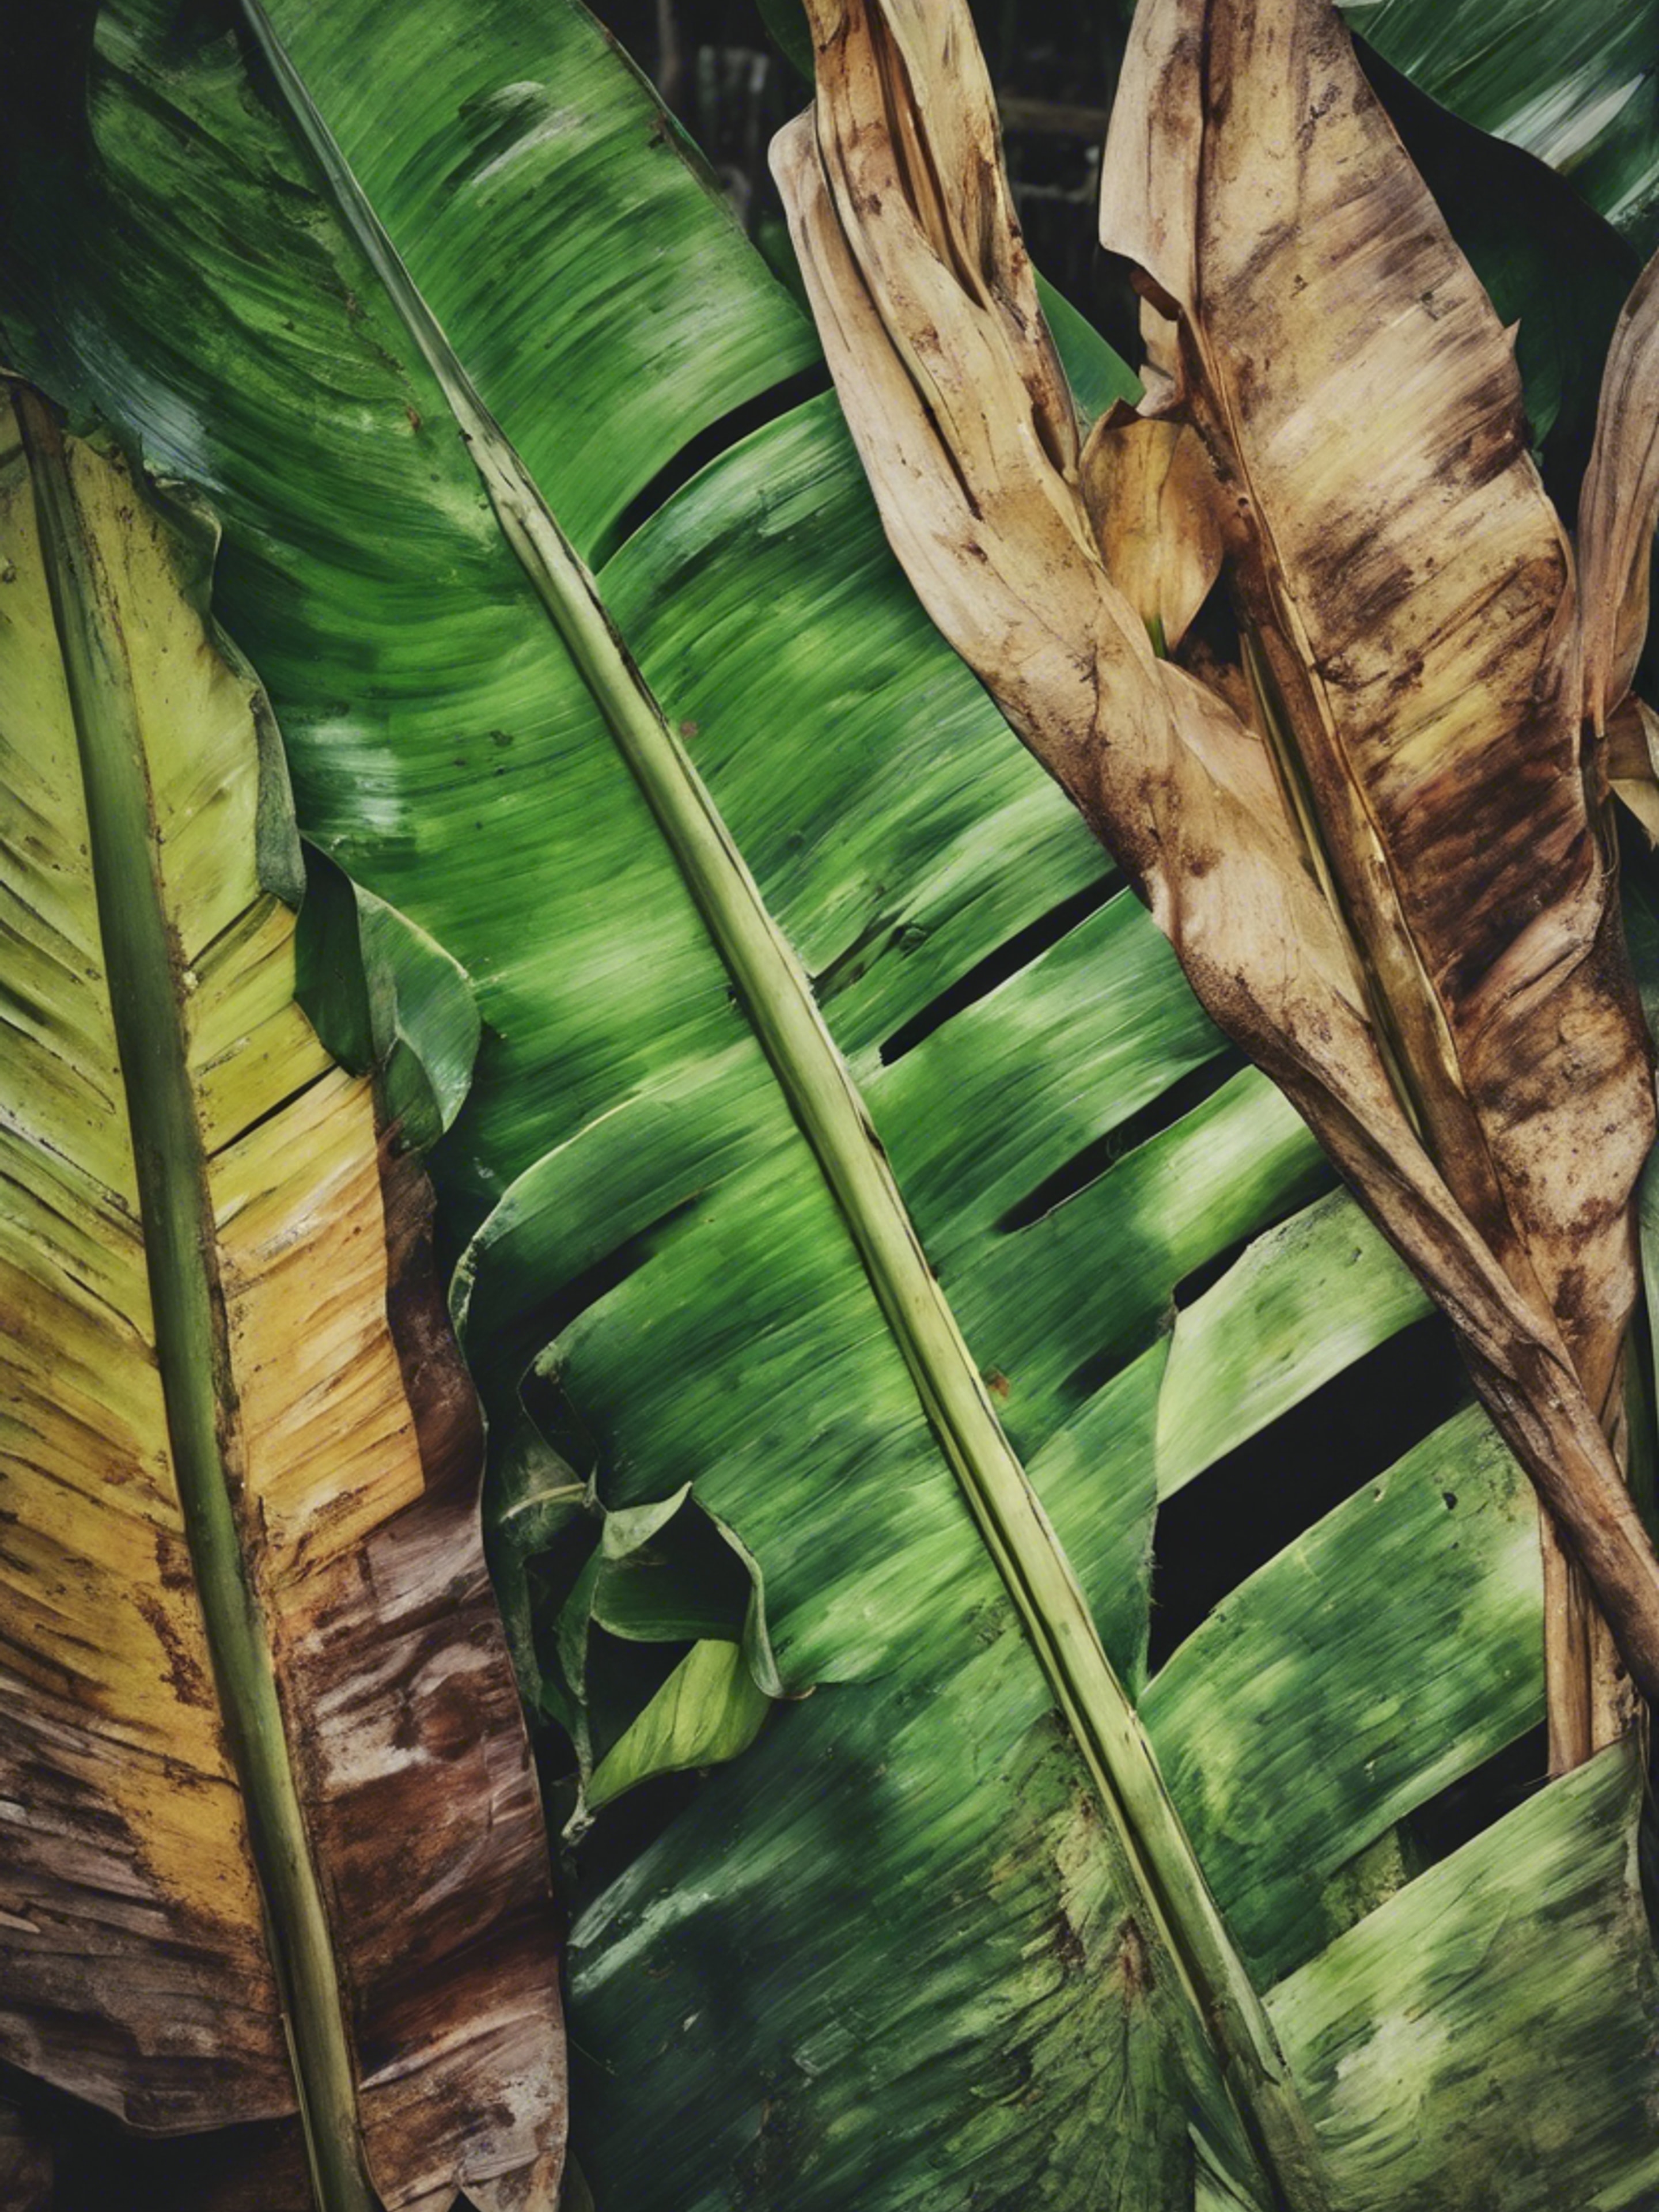 A textured painting of banana leaves in varying stages of life and decay. ផ្ទាំង​រូបភាព[272dba85425e4d608ad5]